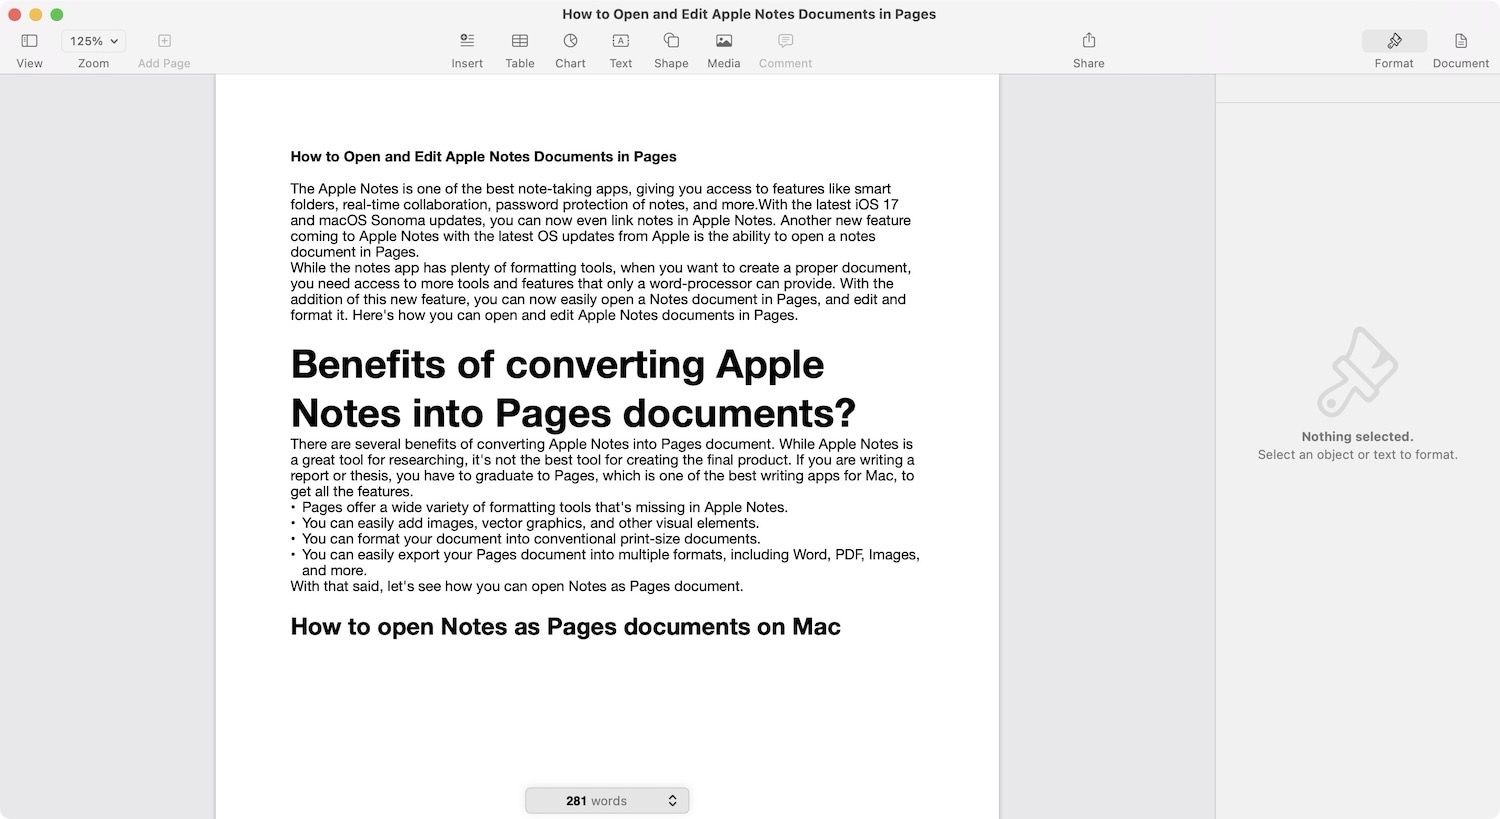 Notes open as Pages documents on Mac